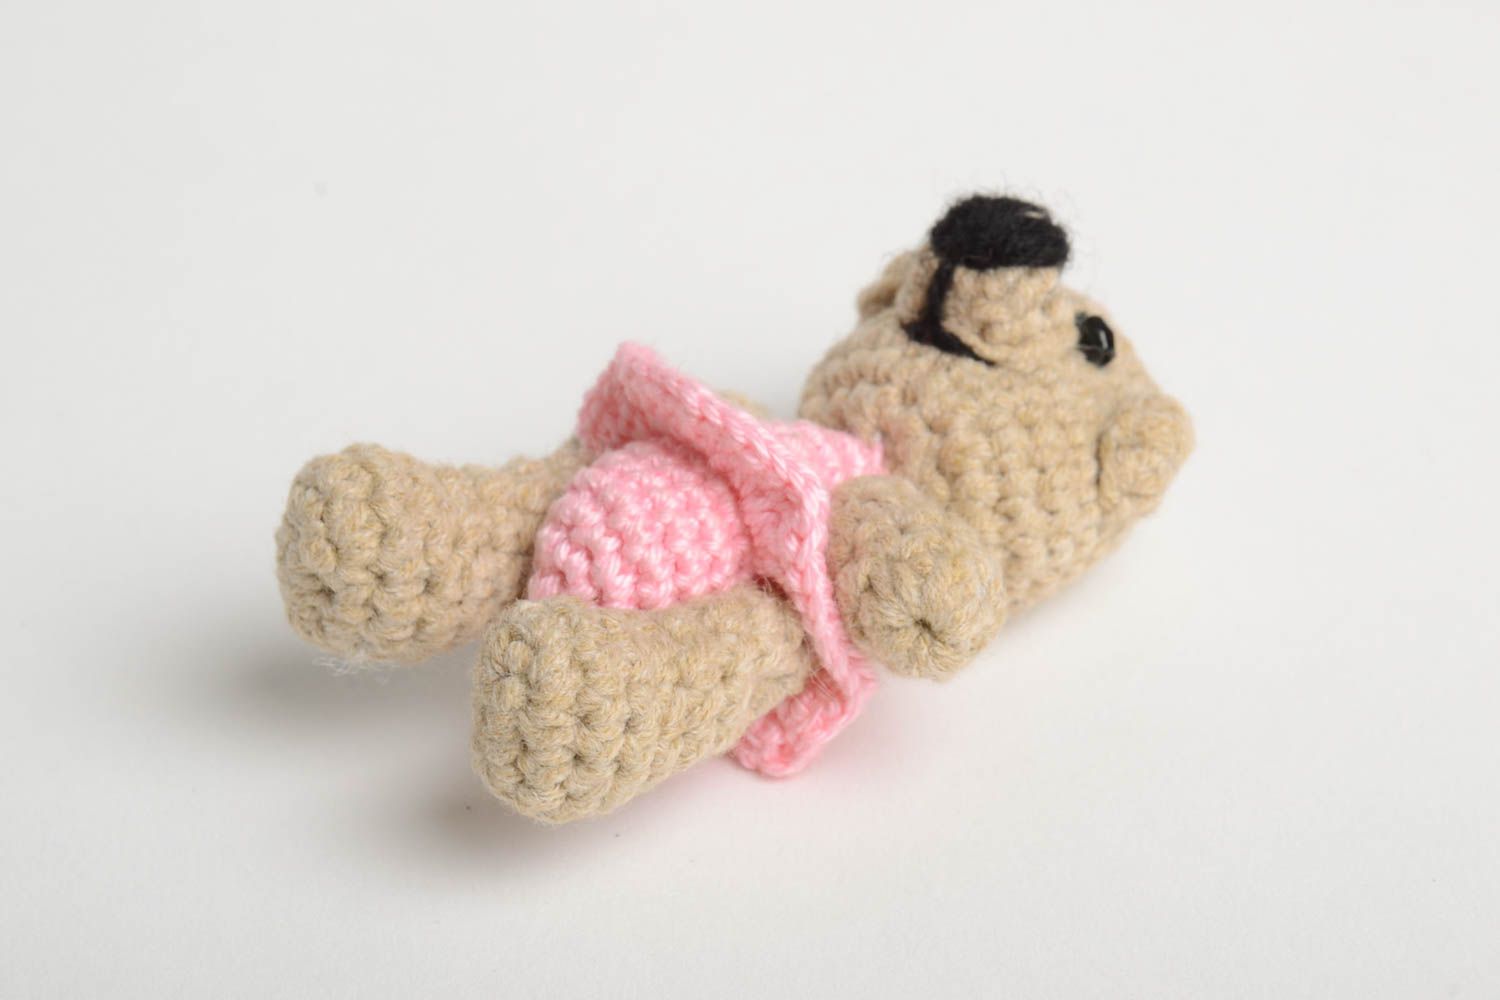 Handmade toy crocheted toy decor ideas beautiful toy gift for baby soft toy photo 3